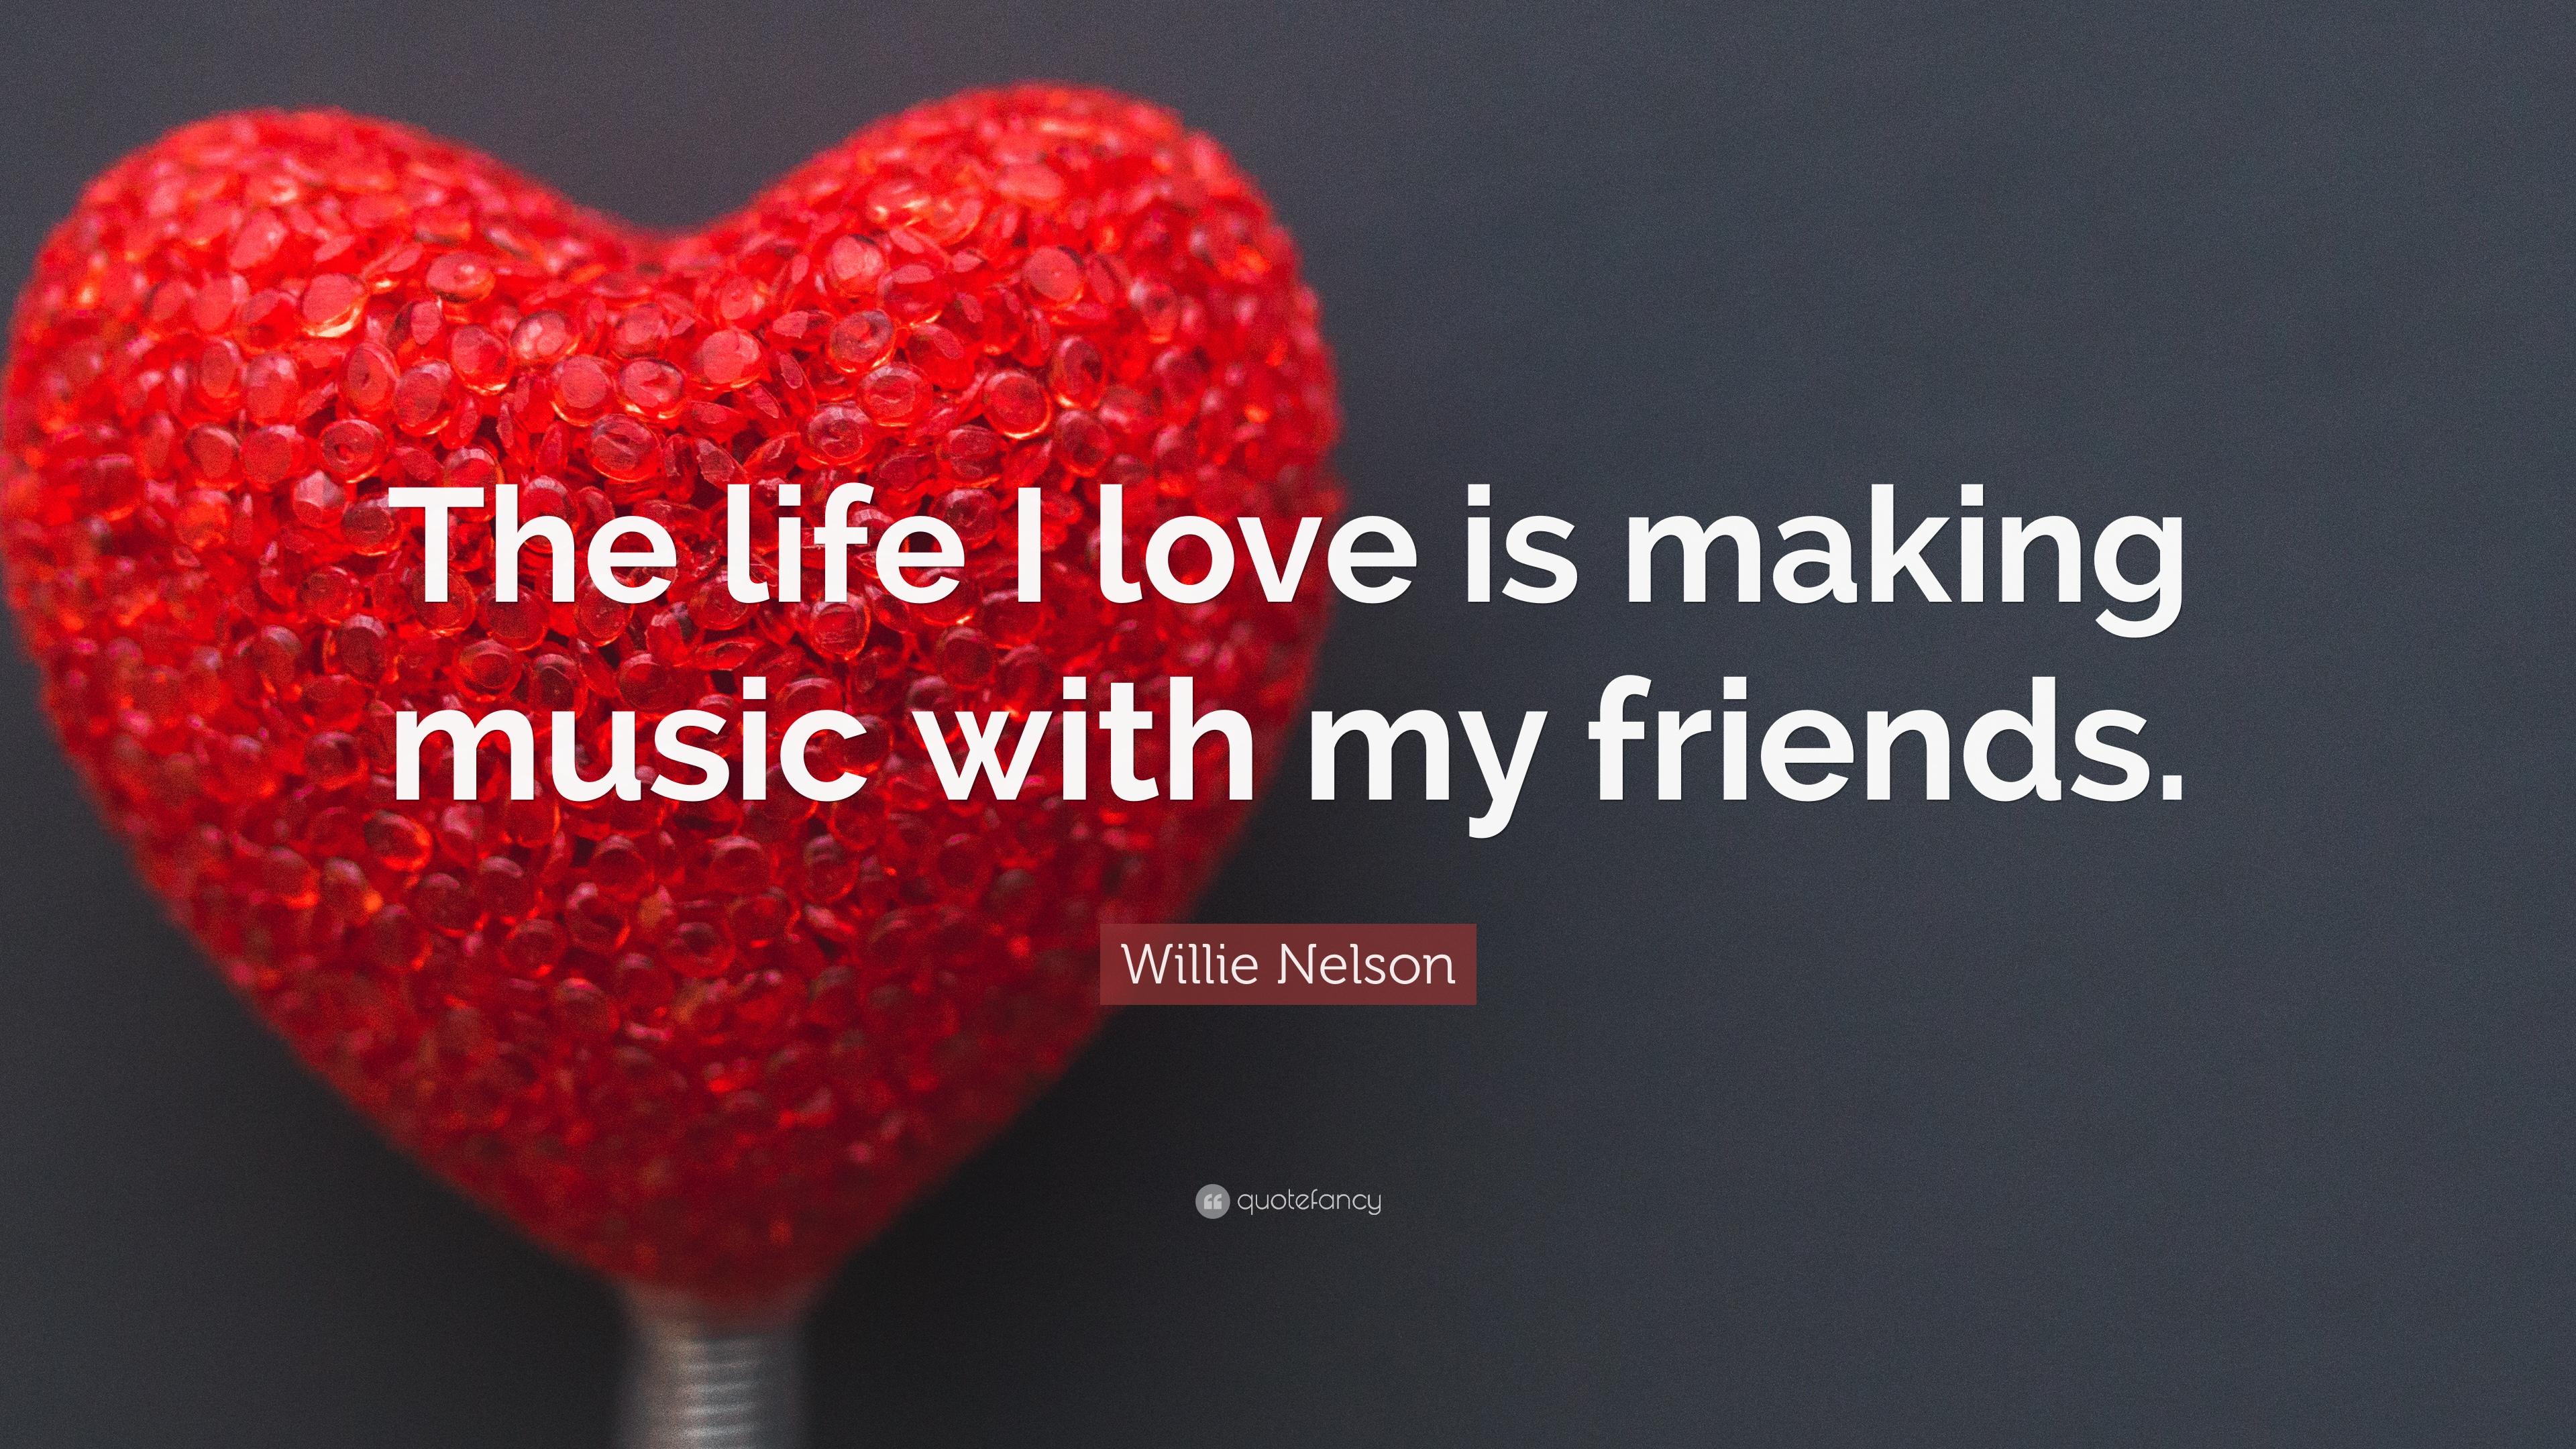 Willie Nelson Quote: “The life I love is making music with my